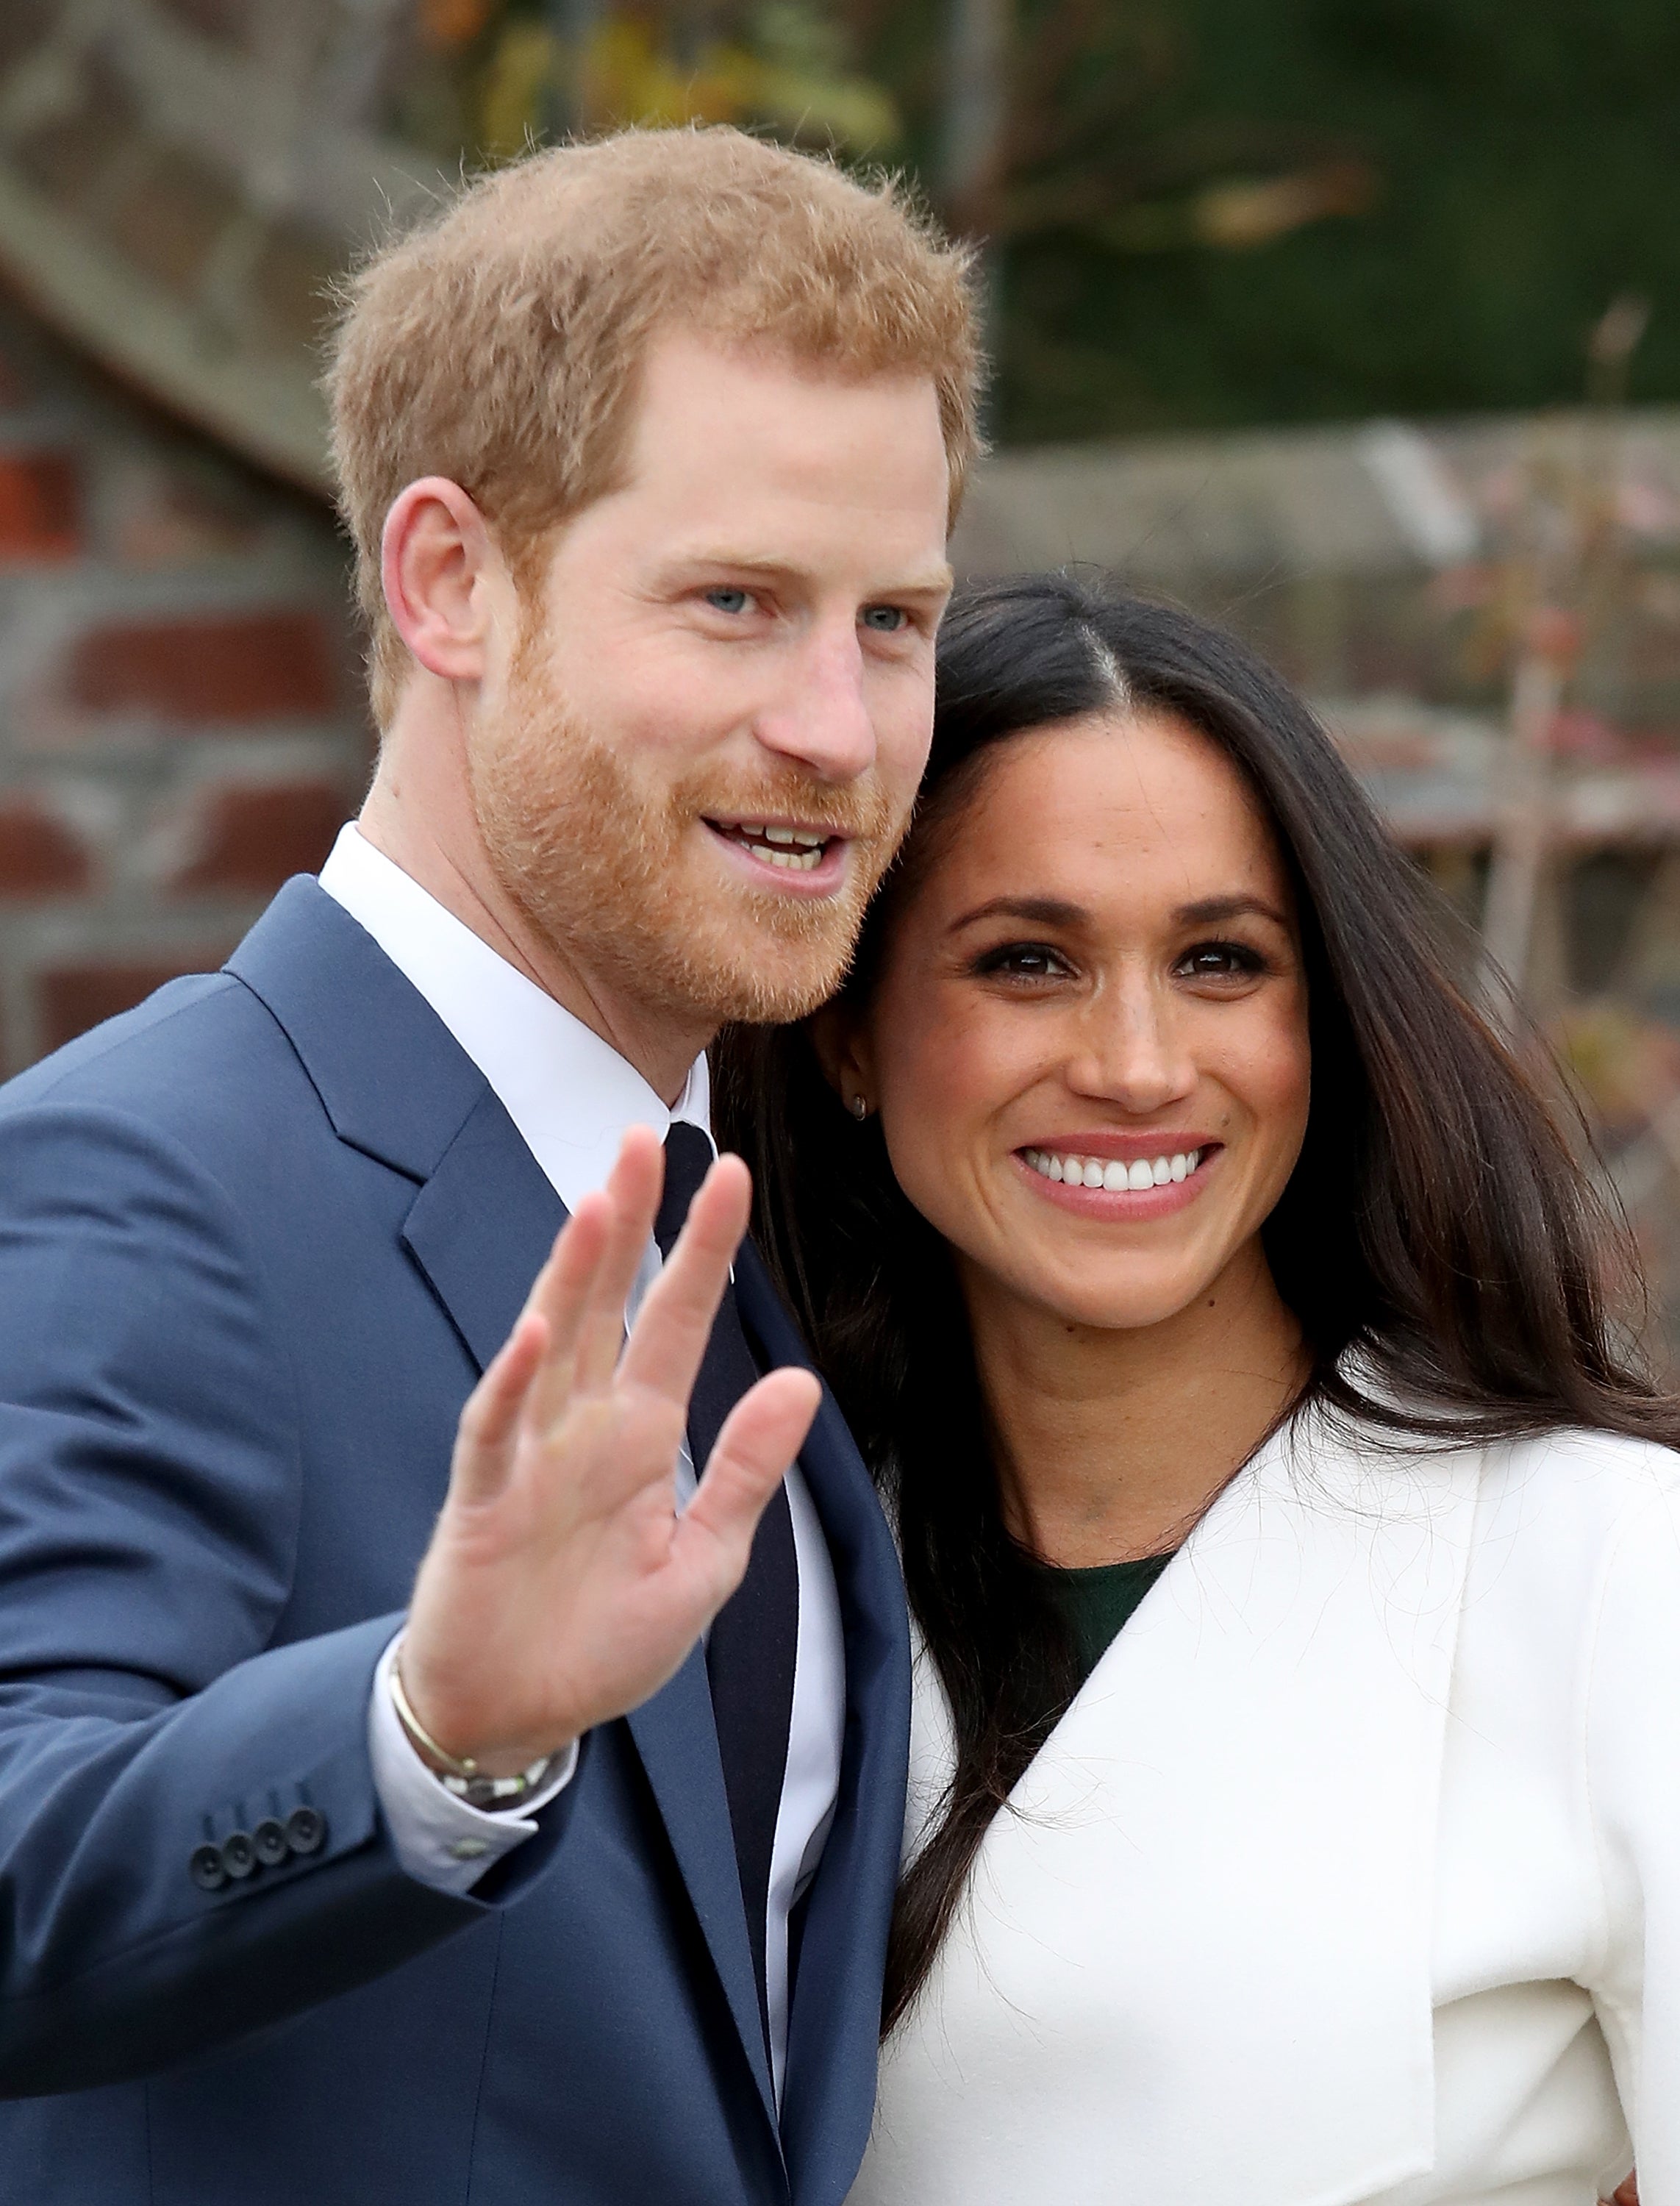 Prince Harry Is Engaged To Meghan Markle!